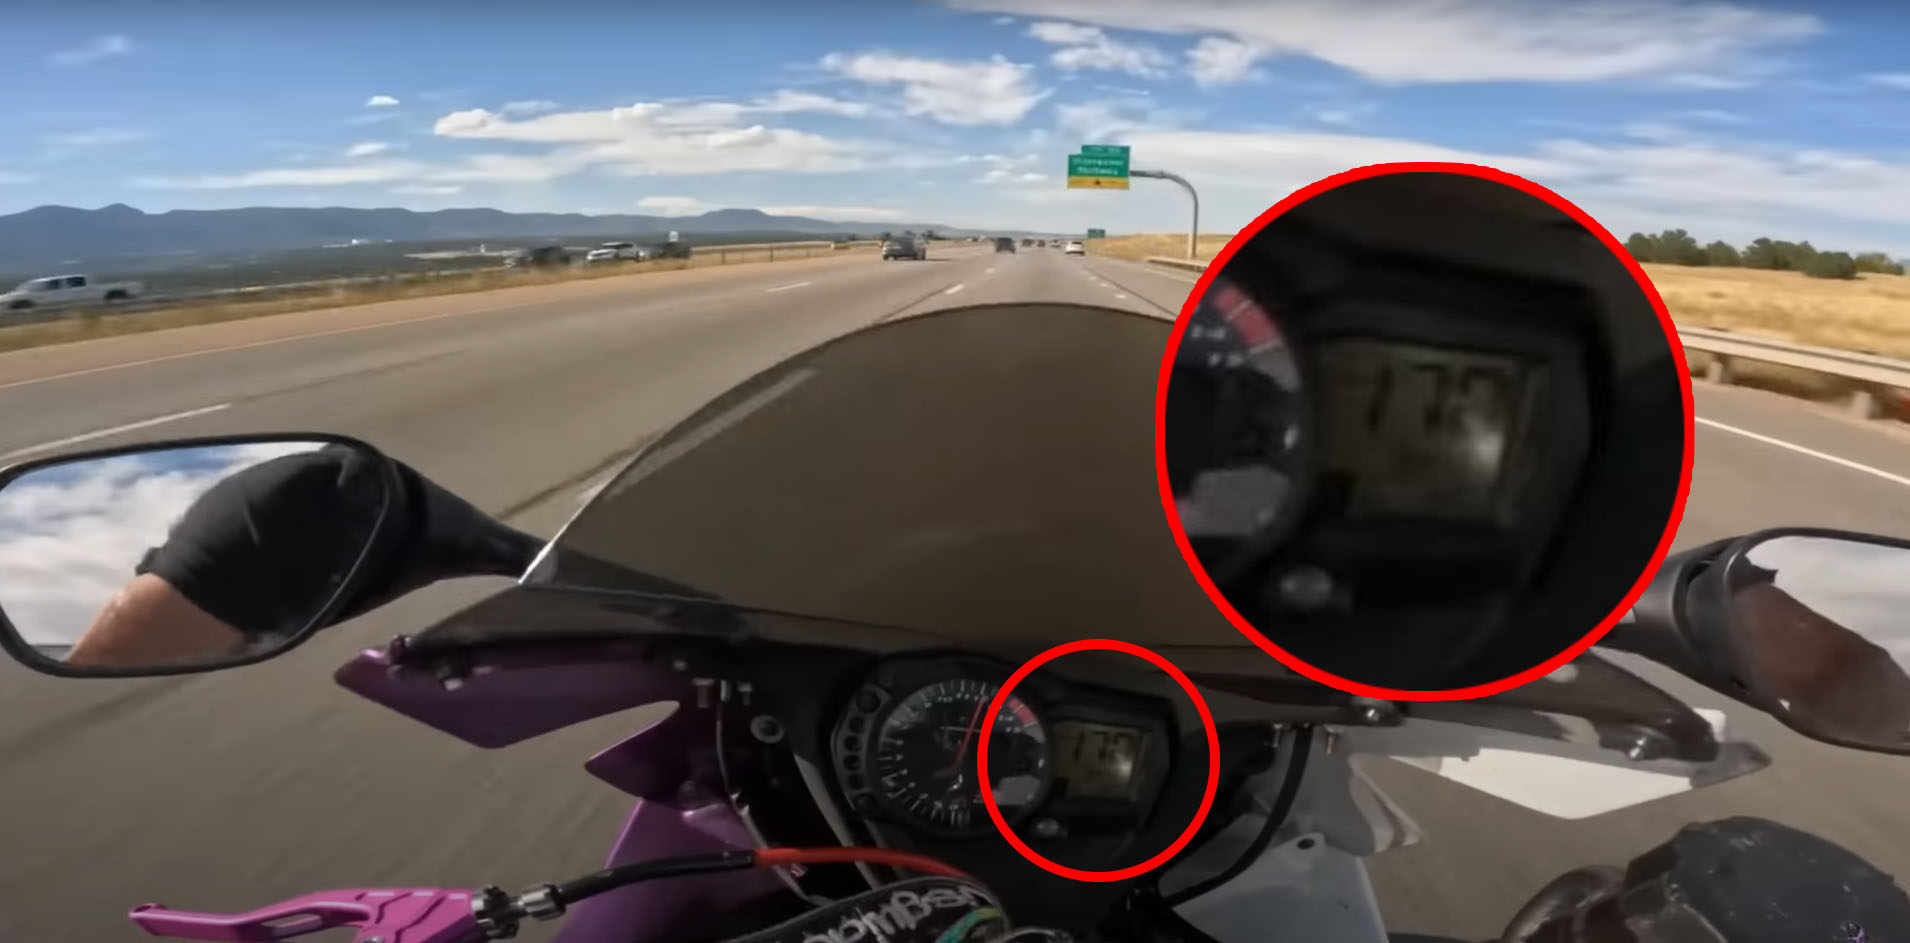 Heartstopping footage showed him riding his bike at speeds of 175mph